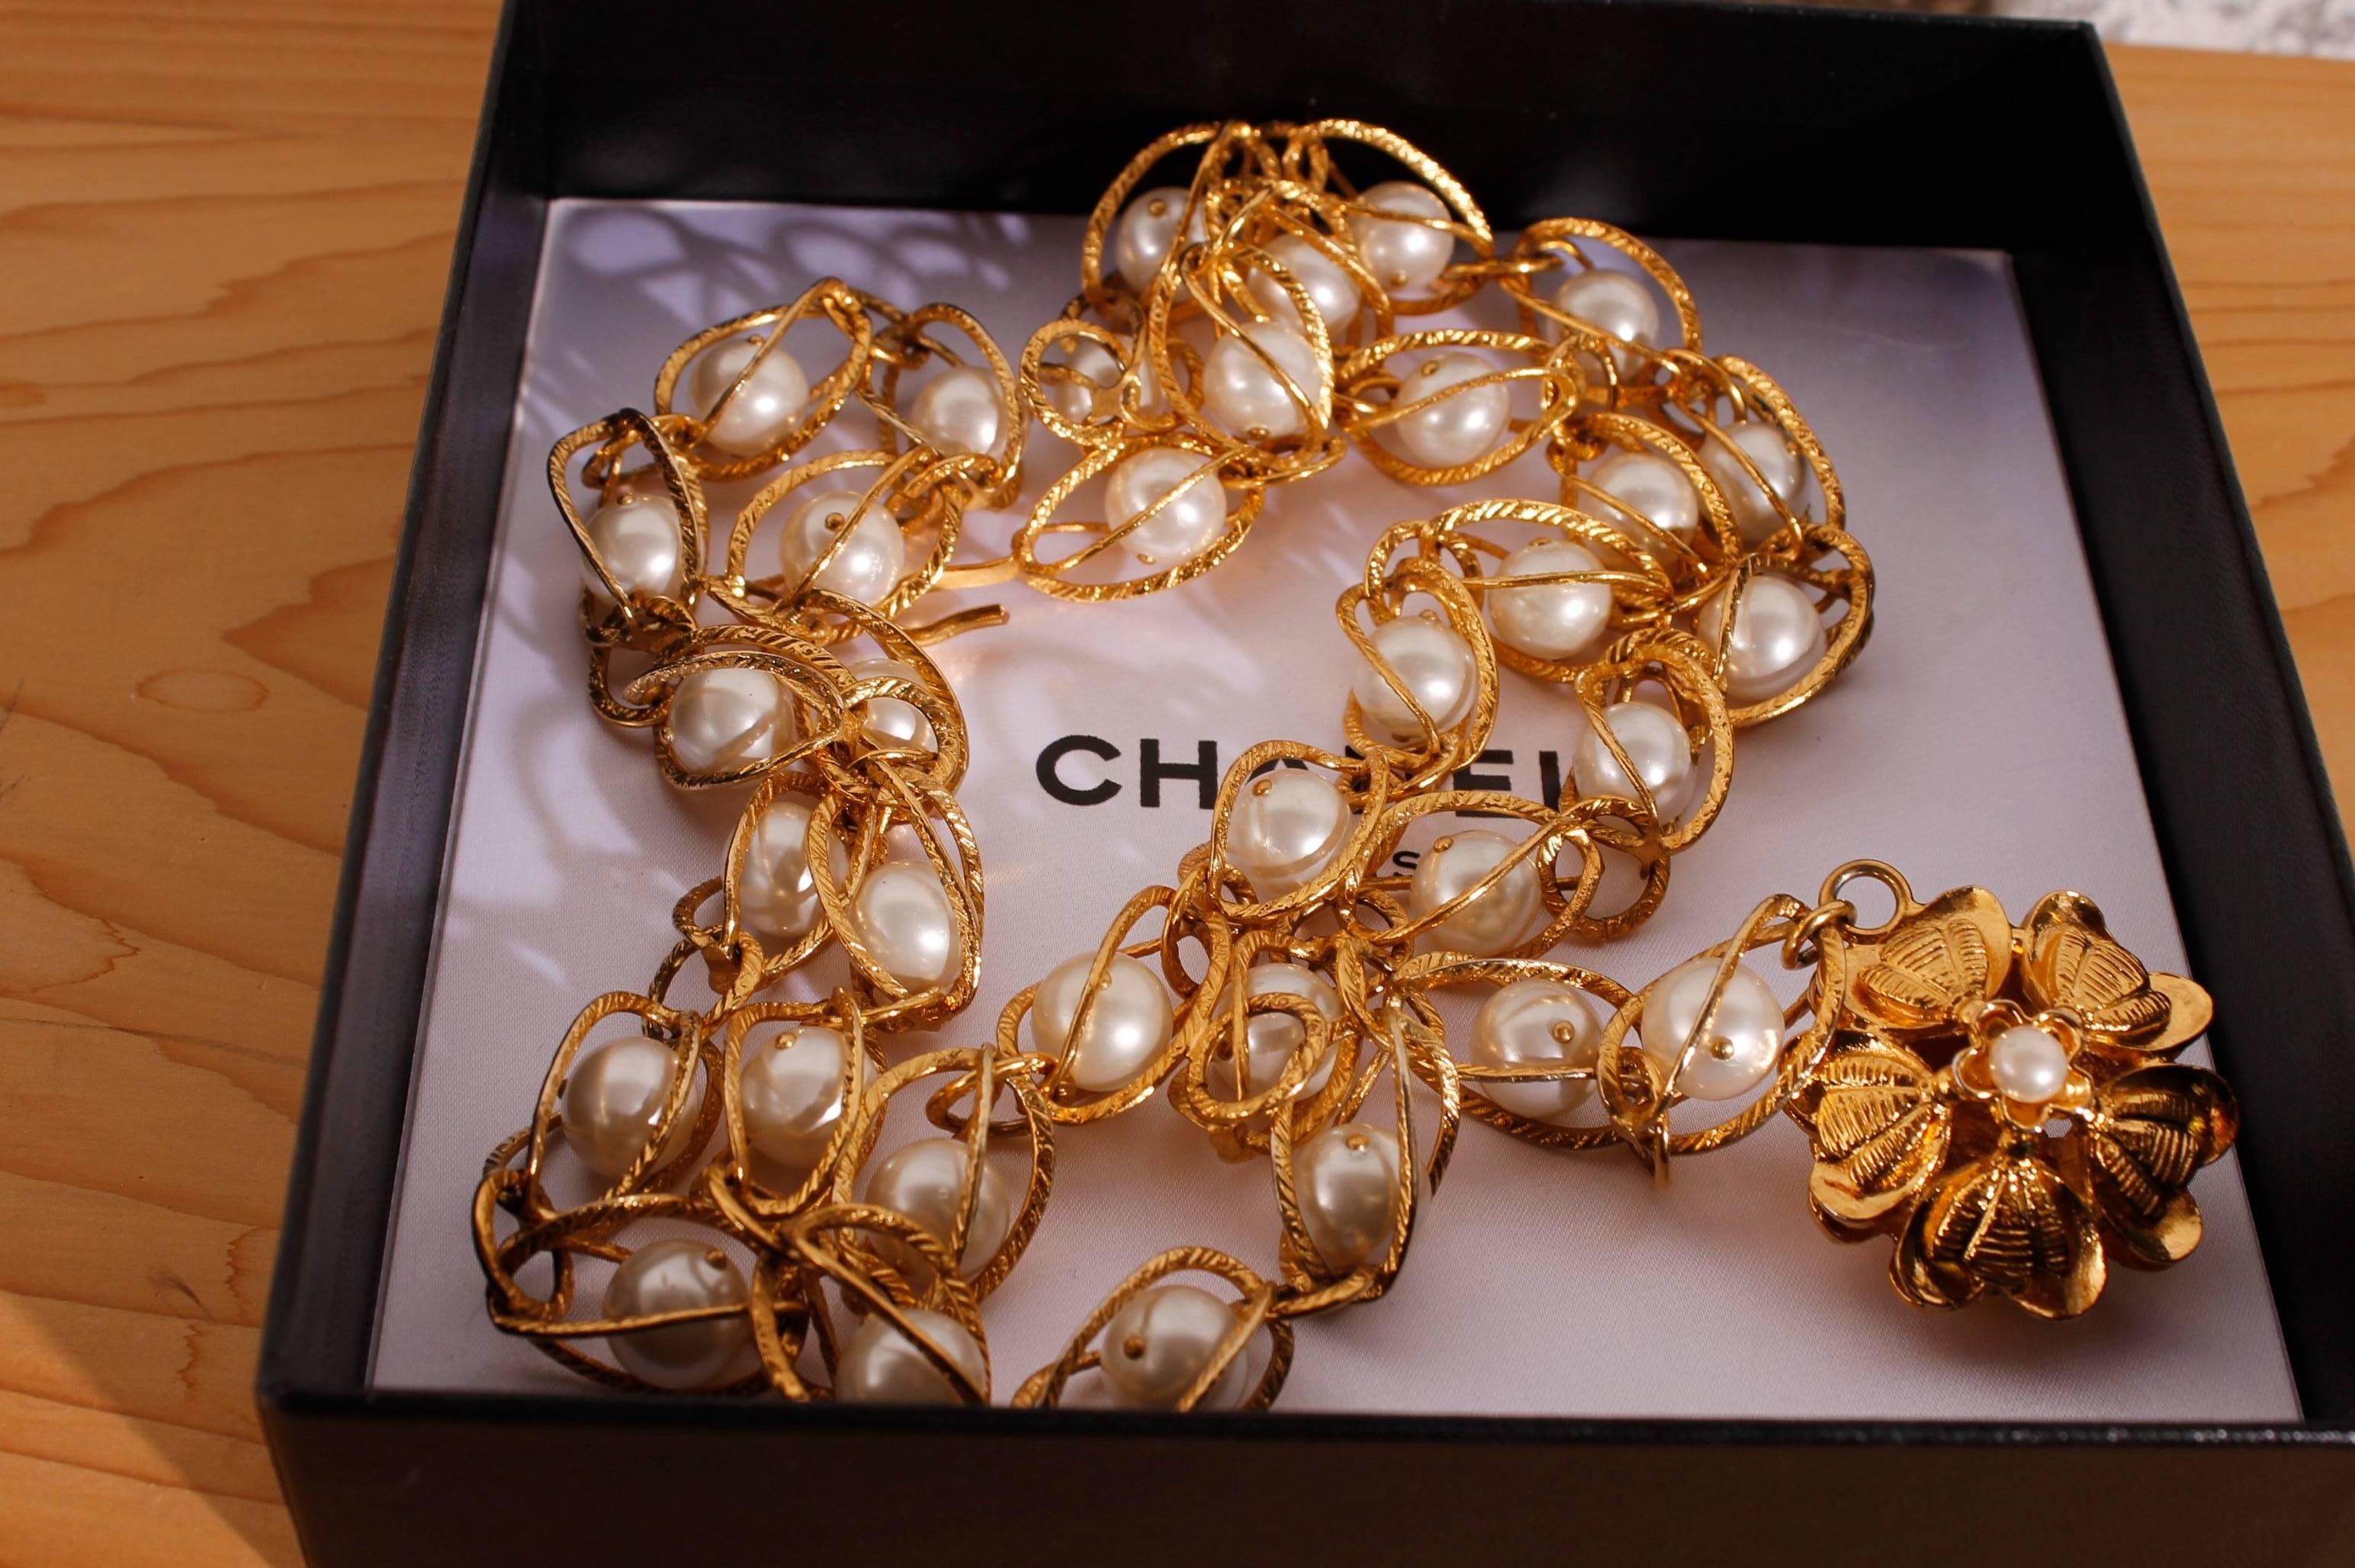 Really fine and chique CHANEL chain belt in goldtone with faux pearls and a flower pendant with a little faux pearl inside. 

Every shackle has a round pearl inside, the end of the chain is double. A large flower pendant at the other end of the